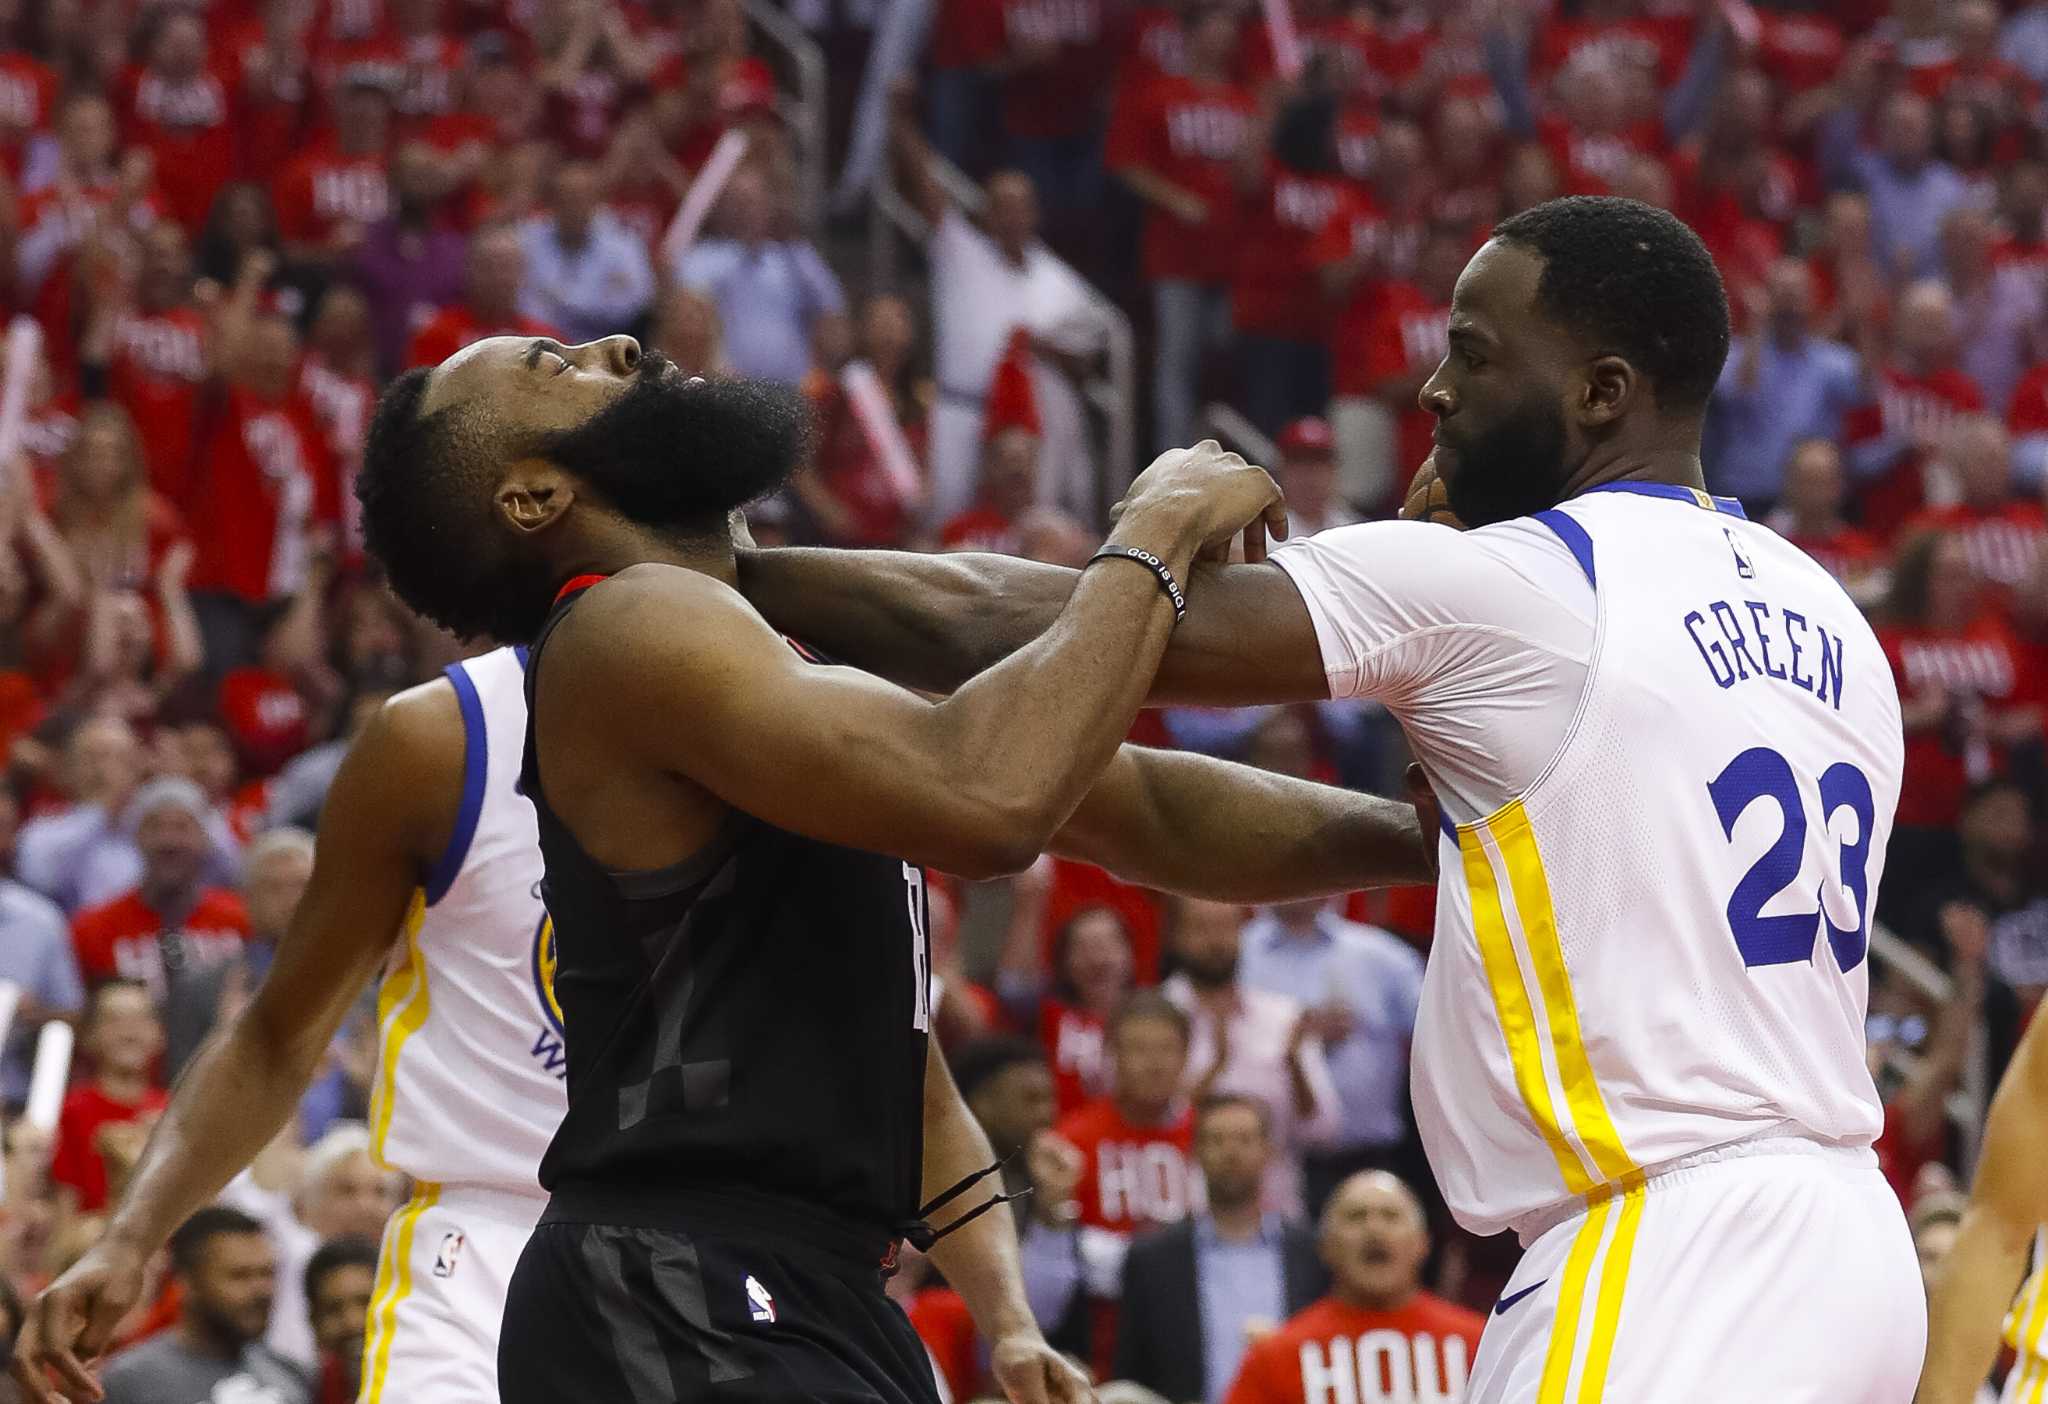 Draymond Green brings the passion, as usual